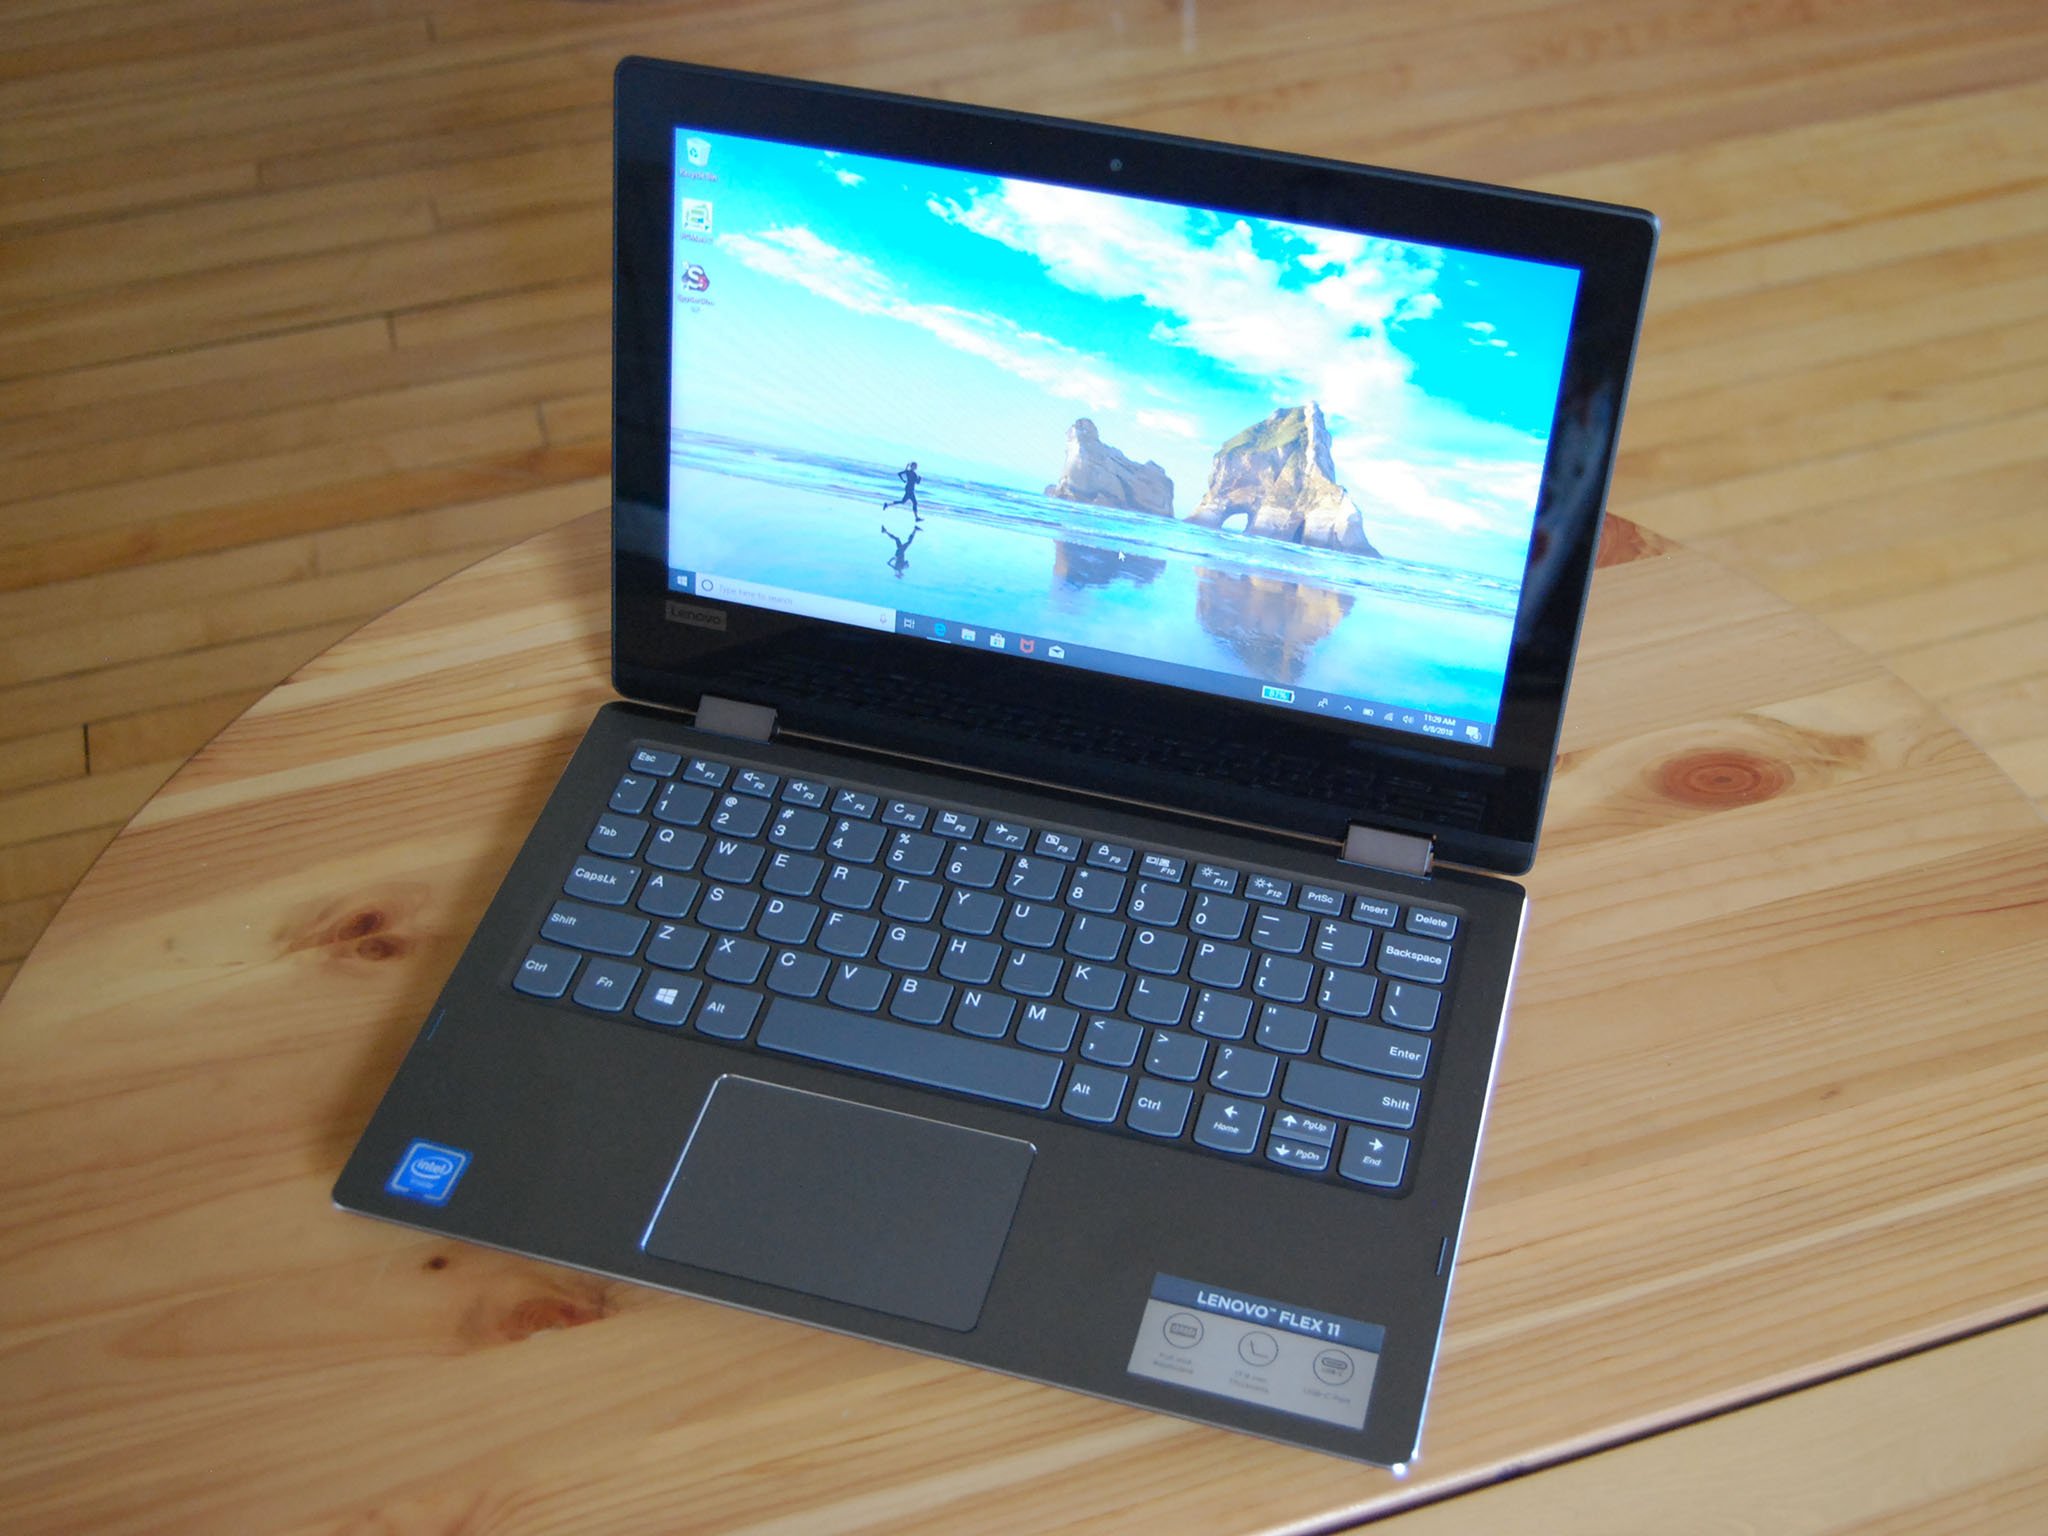 Lenovo Flex 6 11 review: Affordable, but worth it?